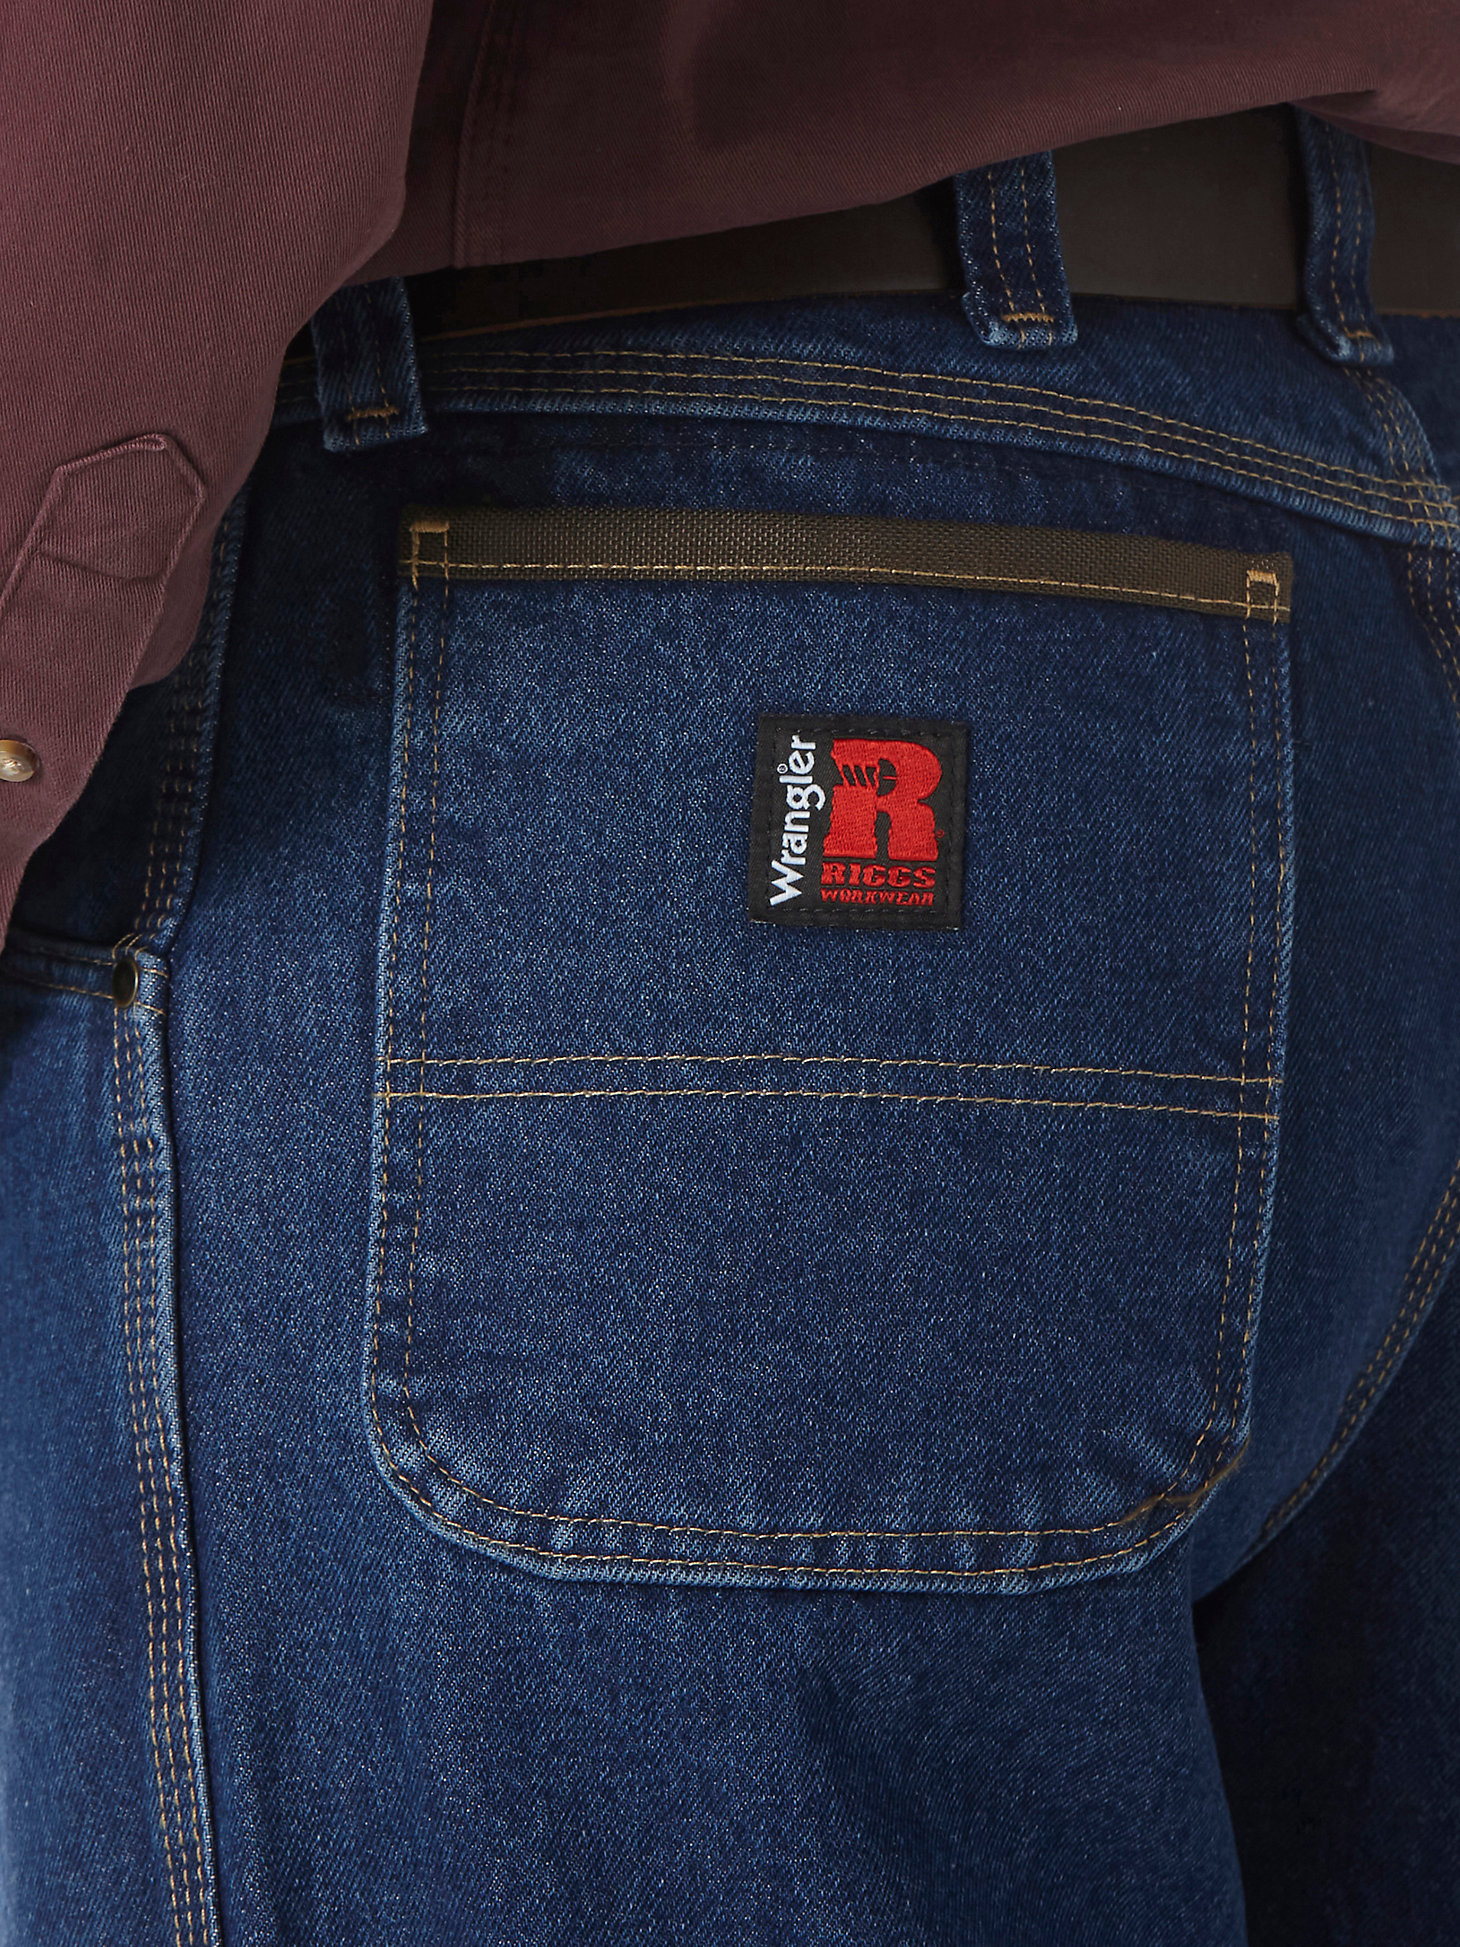 Wrangler® RIGGS Workwear® Work Horse Jean - Relaxed Fit in Antique Indigo alternative view 2